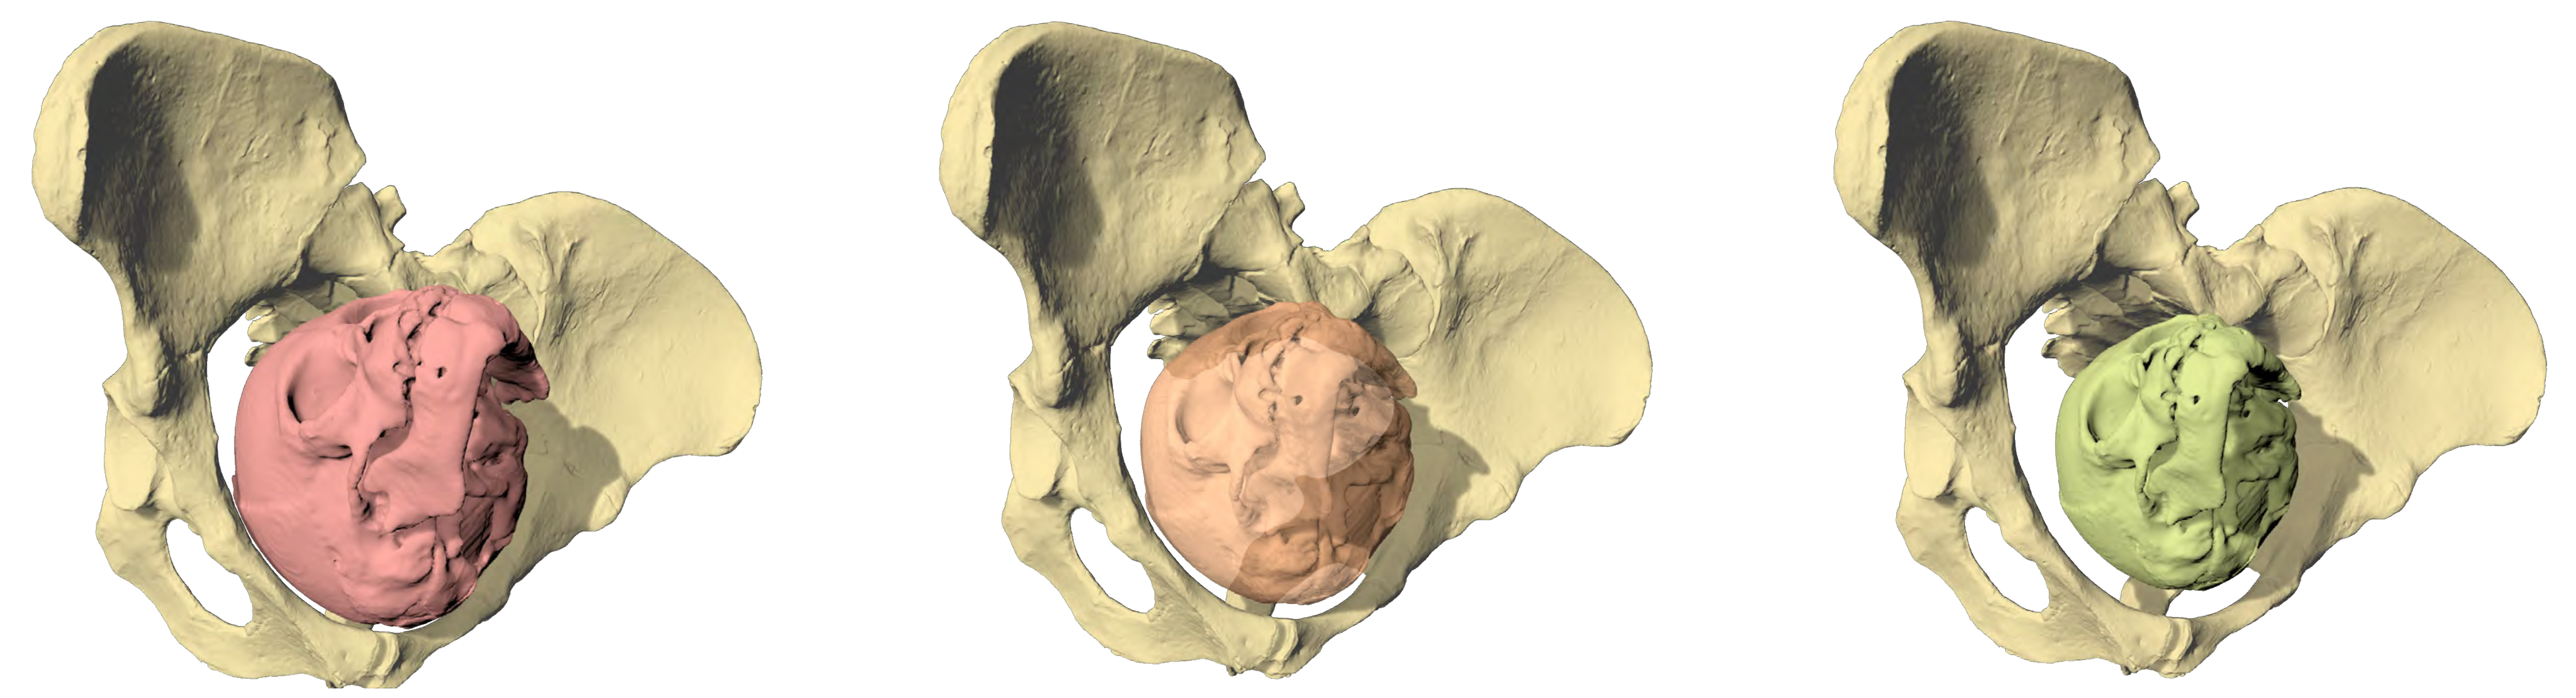 Birth simulation of Lucy (Australopithecus afarensis) with three different fetal head sizes. Only a brain size of maximum 30 percent of the adult size (right) fits through the birth canal. (Picture: Martin Häusler, UZH)